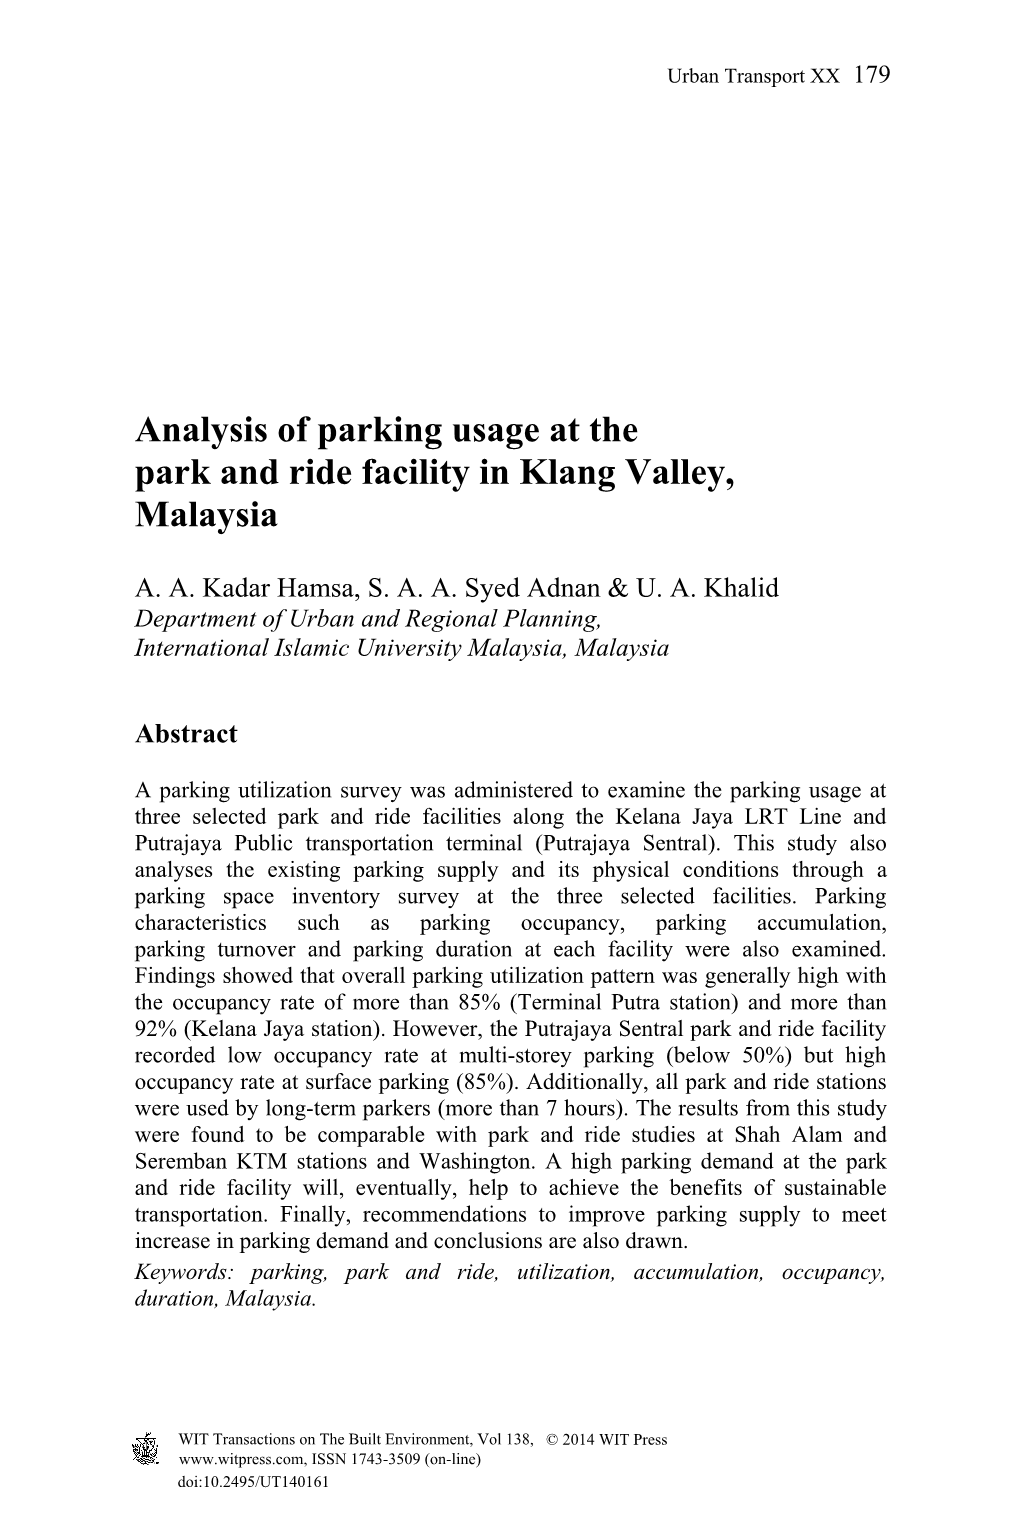 Analysis of Parking Usage at the Park and Ride Facility in Klang Valley, Malaysia